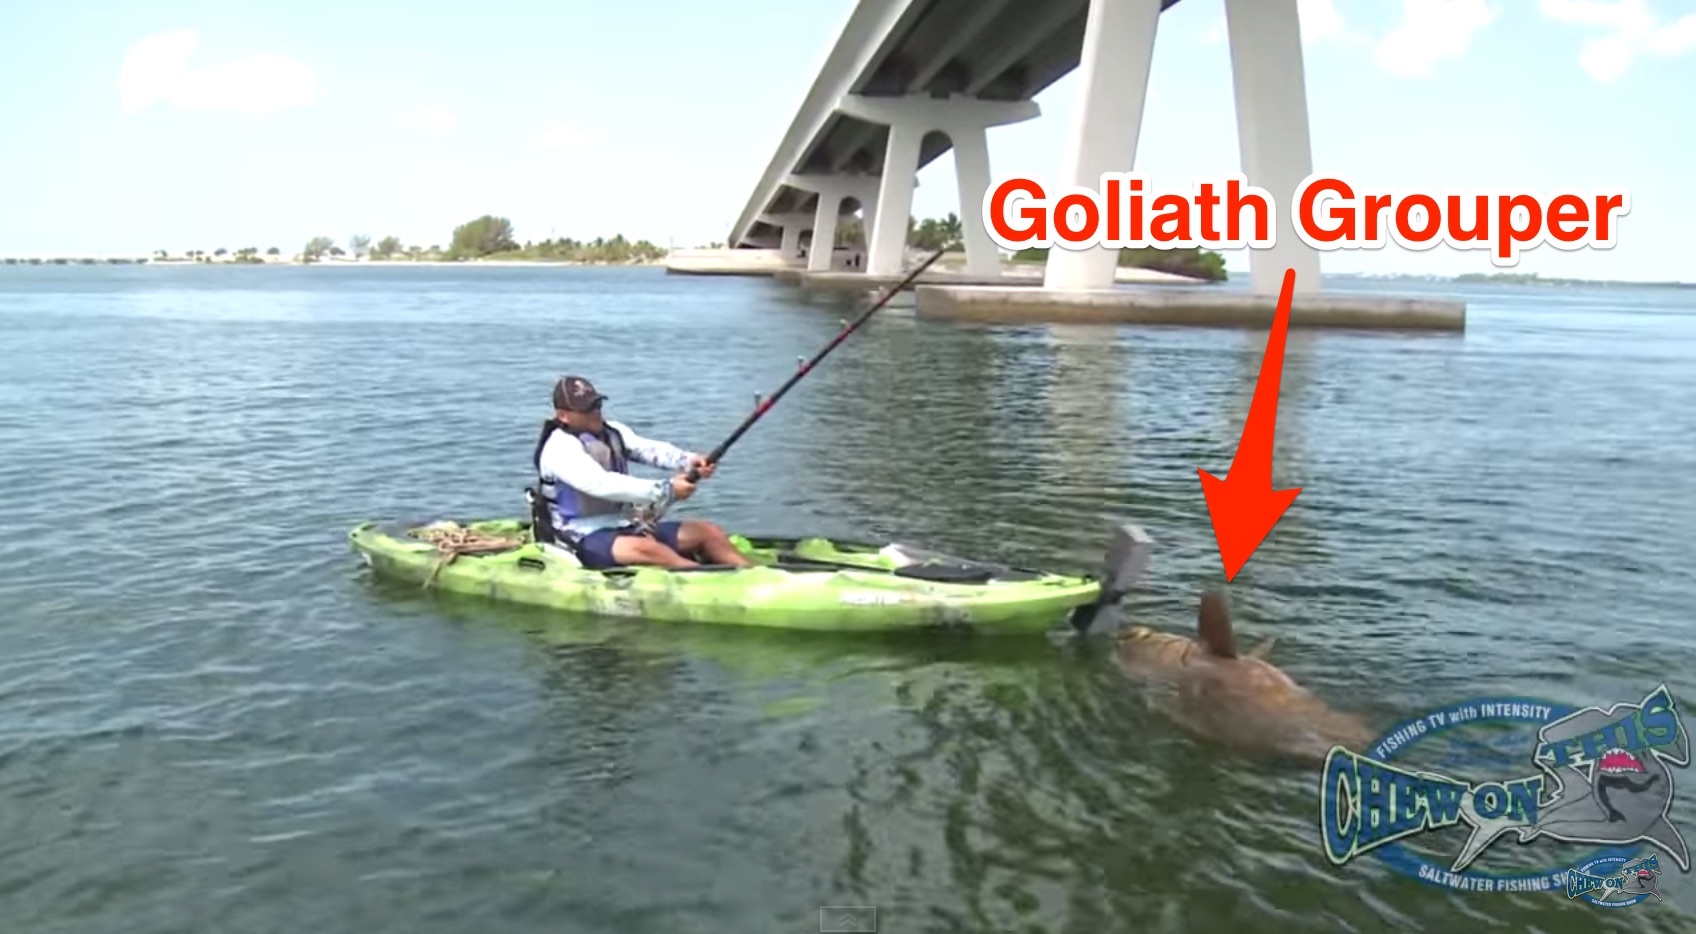 goliath grouper landed from a kayak!